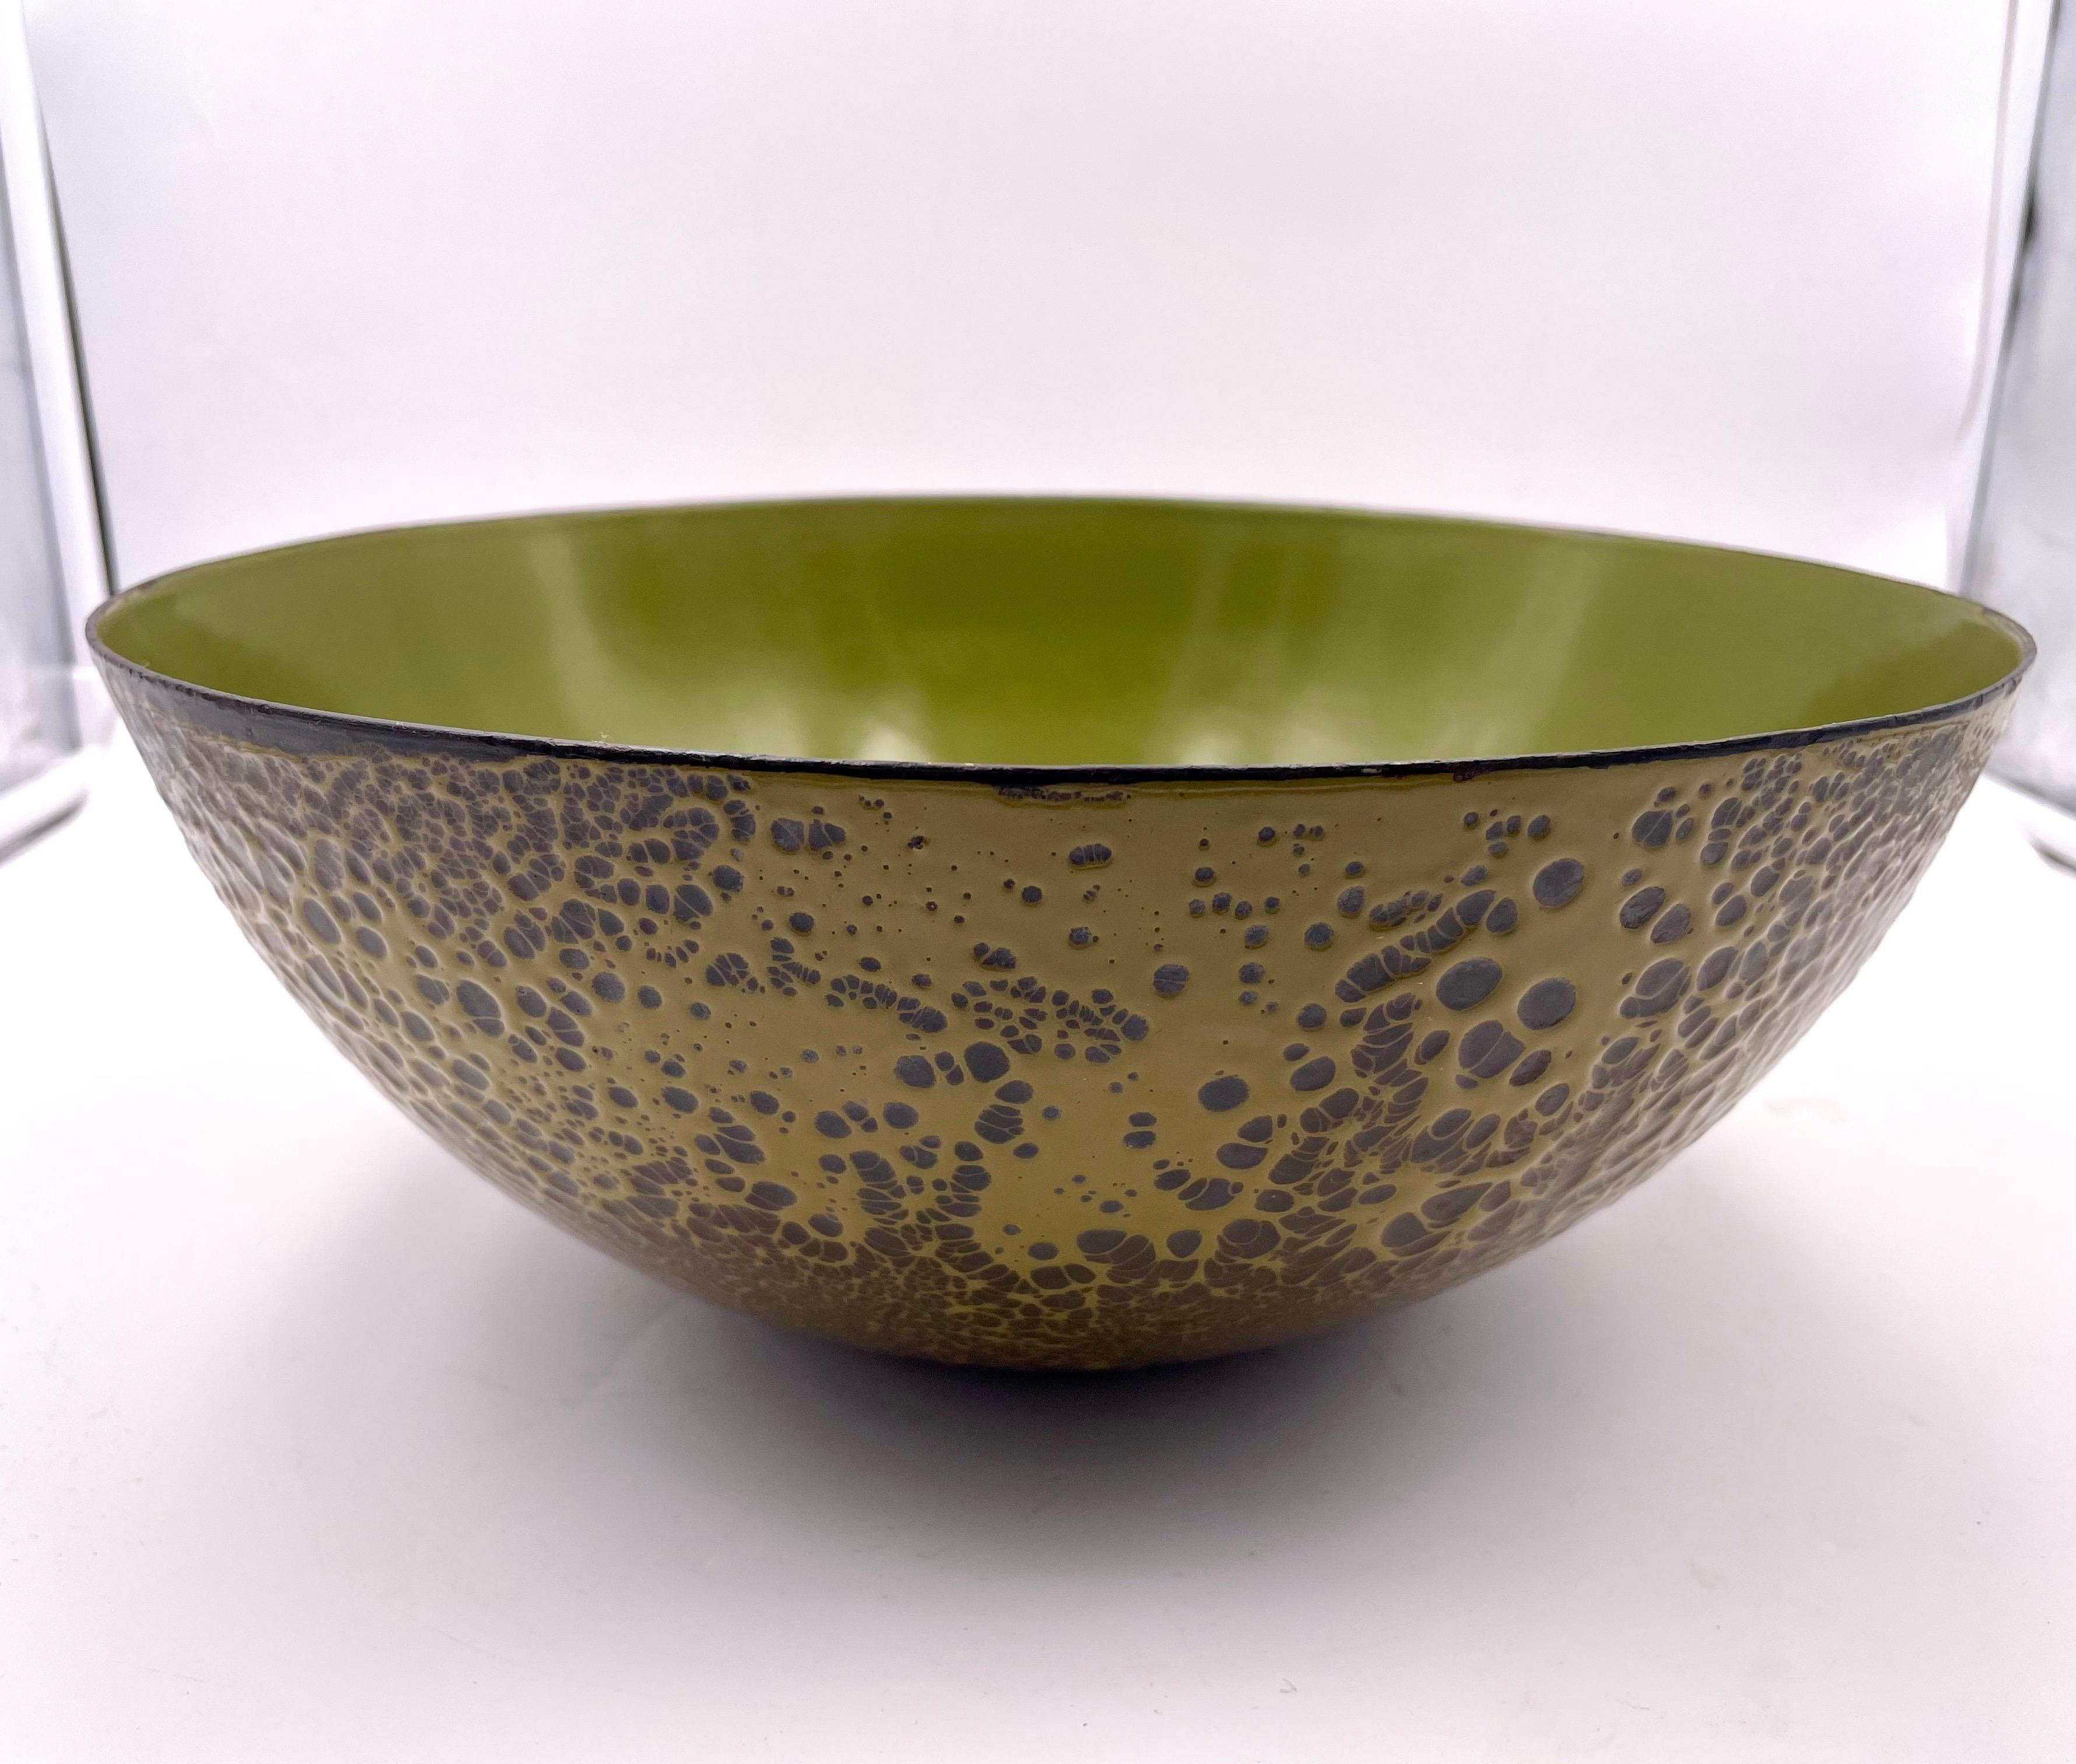 An incredibly beautiful and rare enameled bowl by Hanova of Pasadena circa 1960's great color and incredible glaze and condition, a great example of California Design.